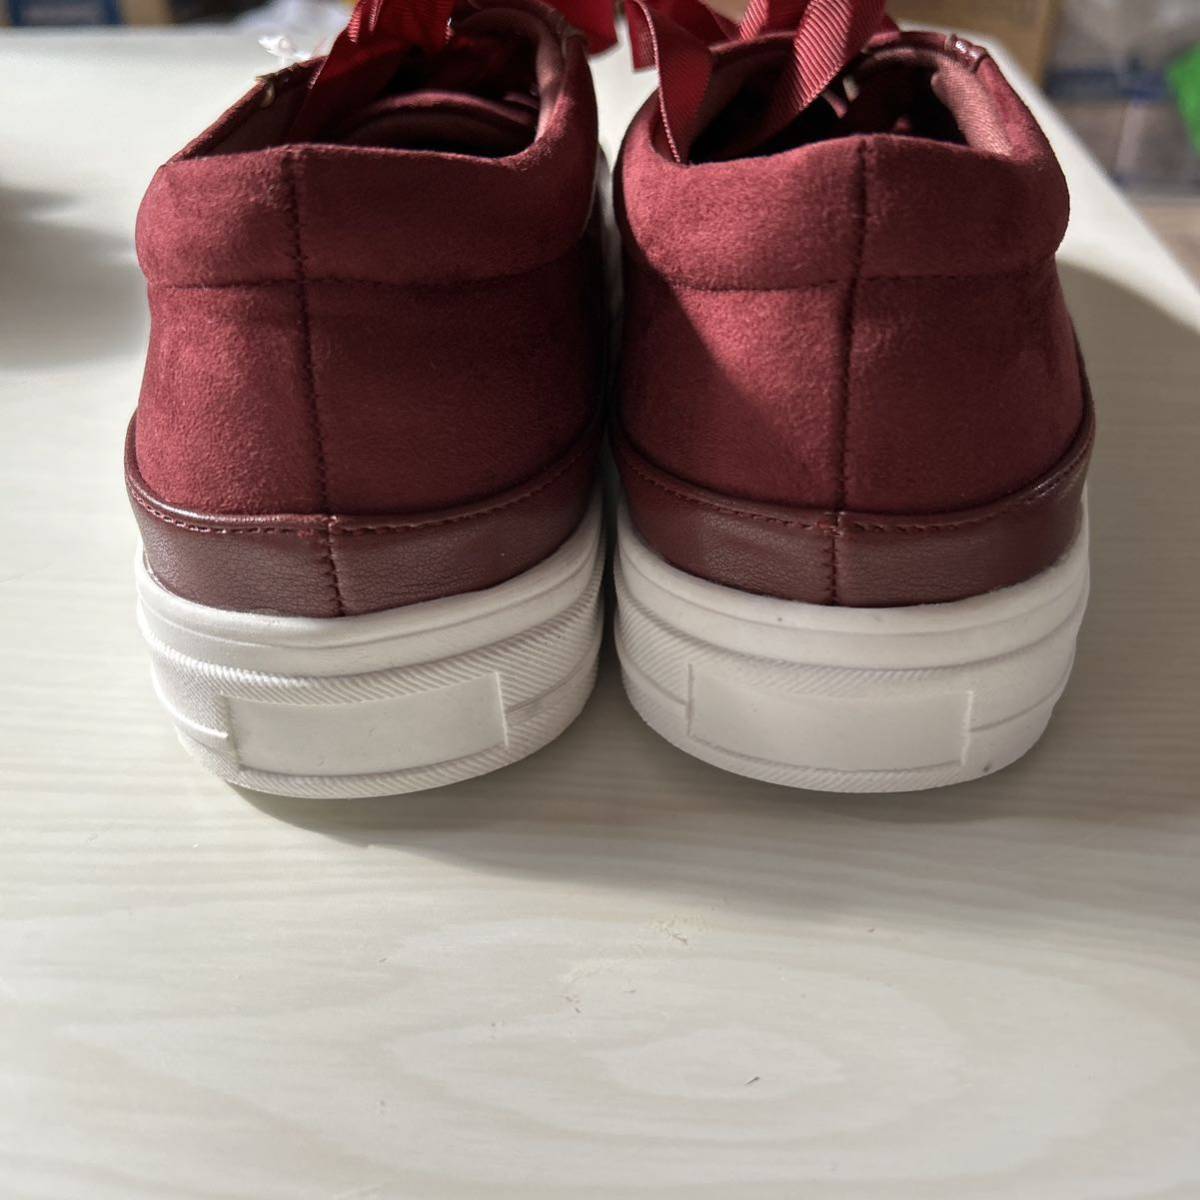  axes femme low cut sneakers wine L sneakers shoes 